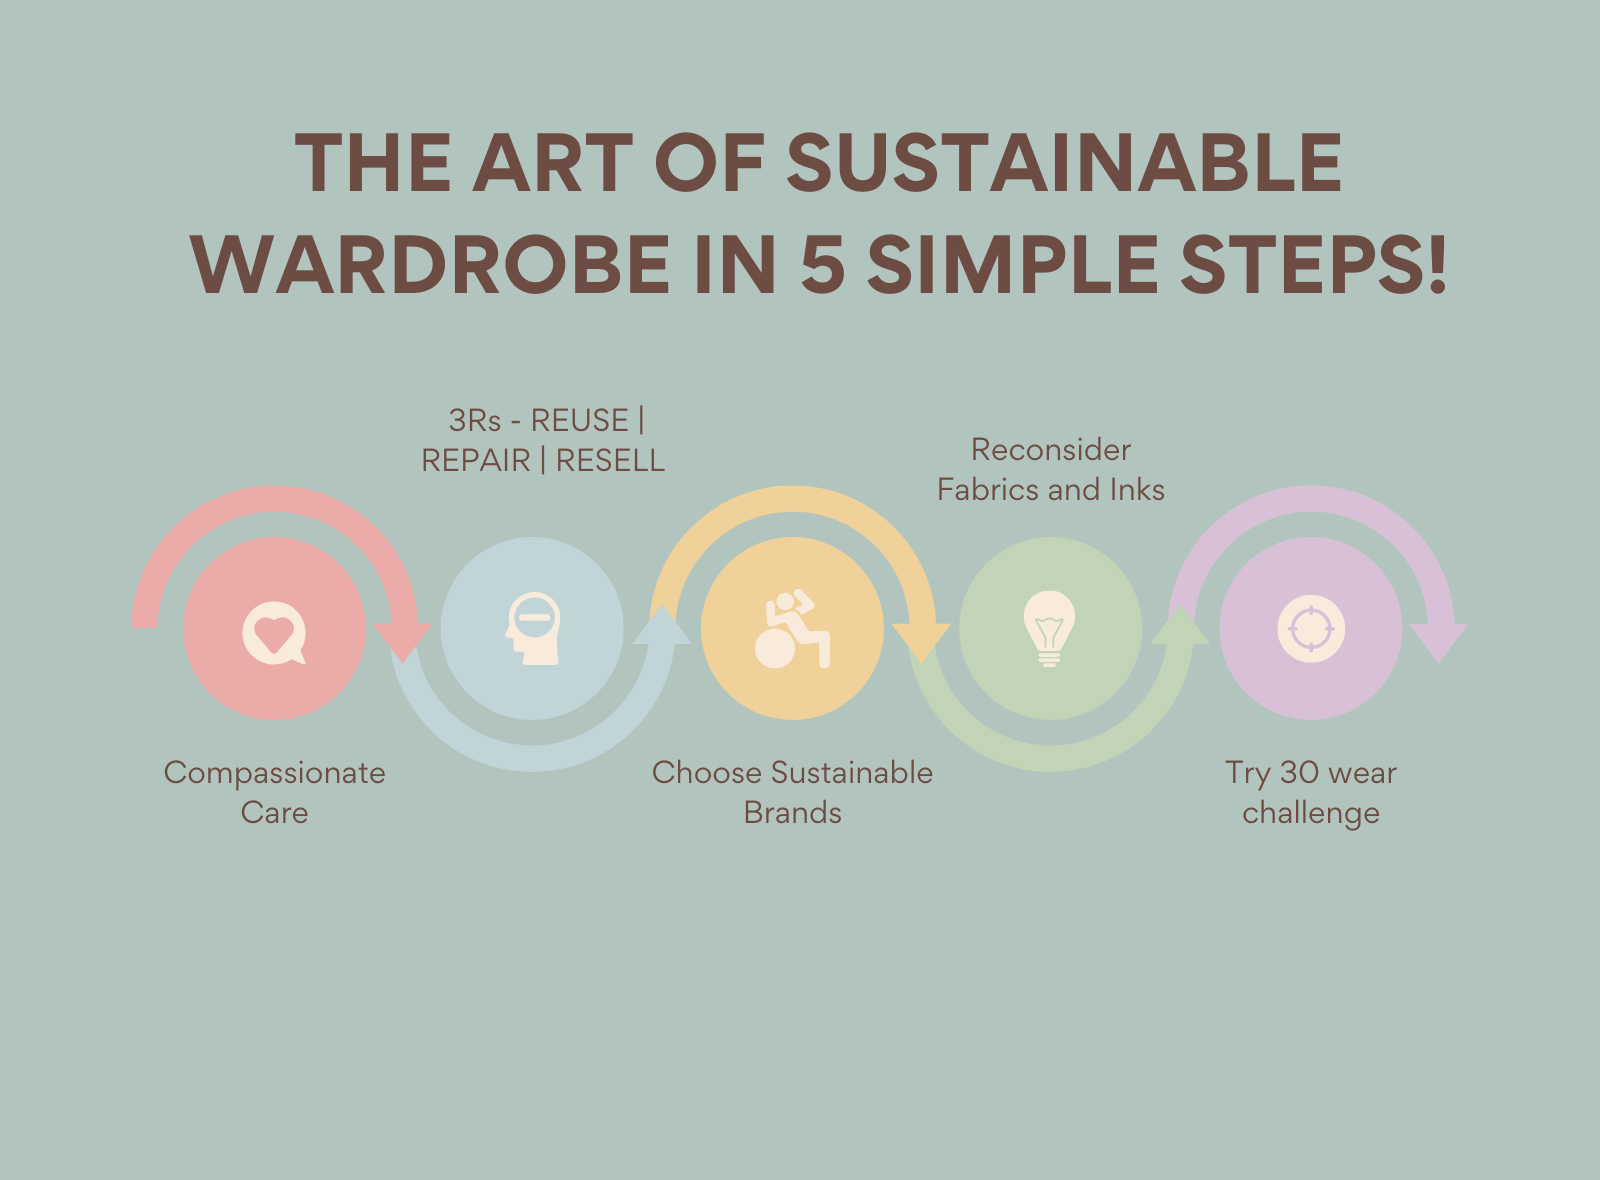 THE ART OF SUSTAINABLE WARDROBE IN 5 SIMPLE STEPS!